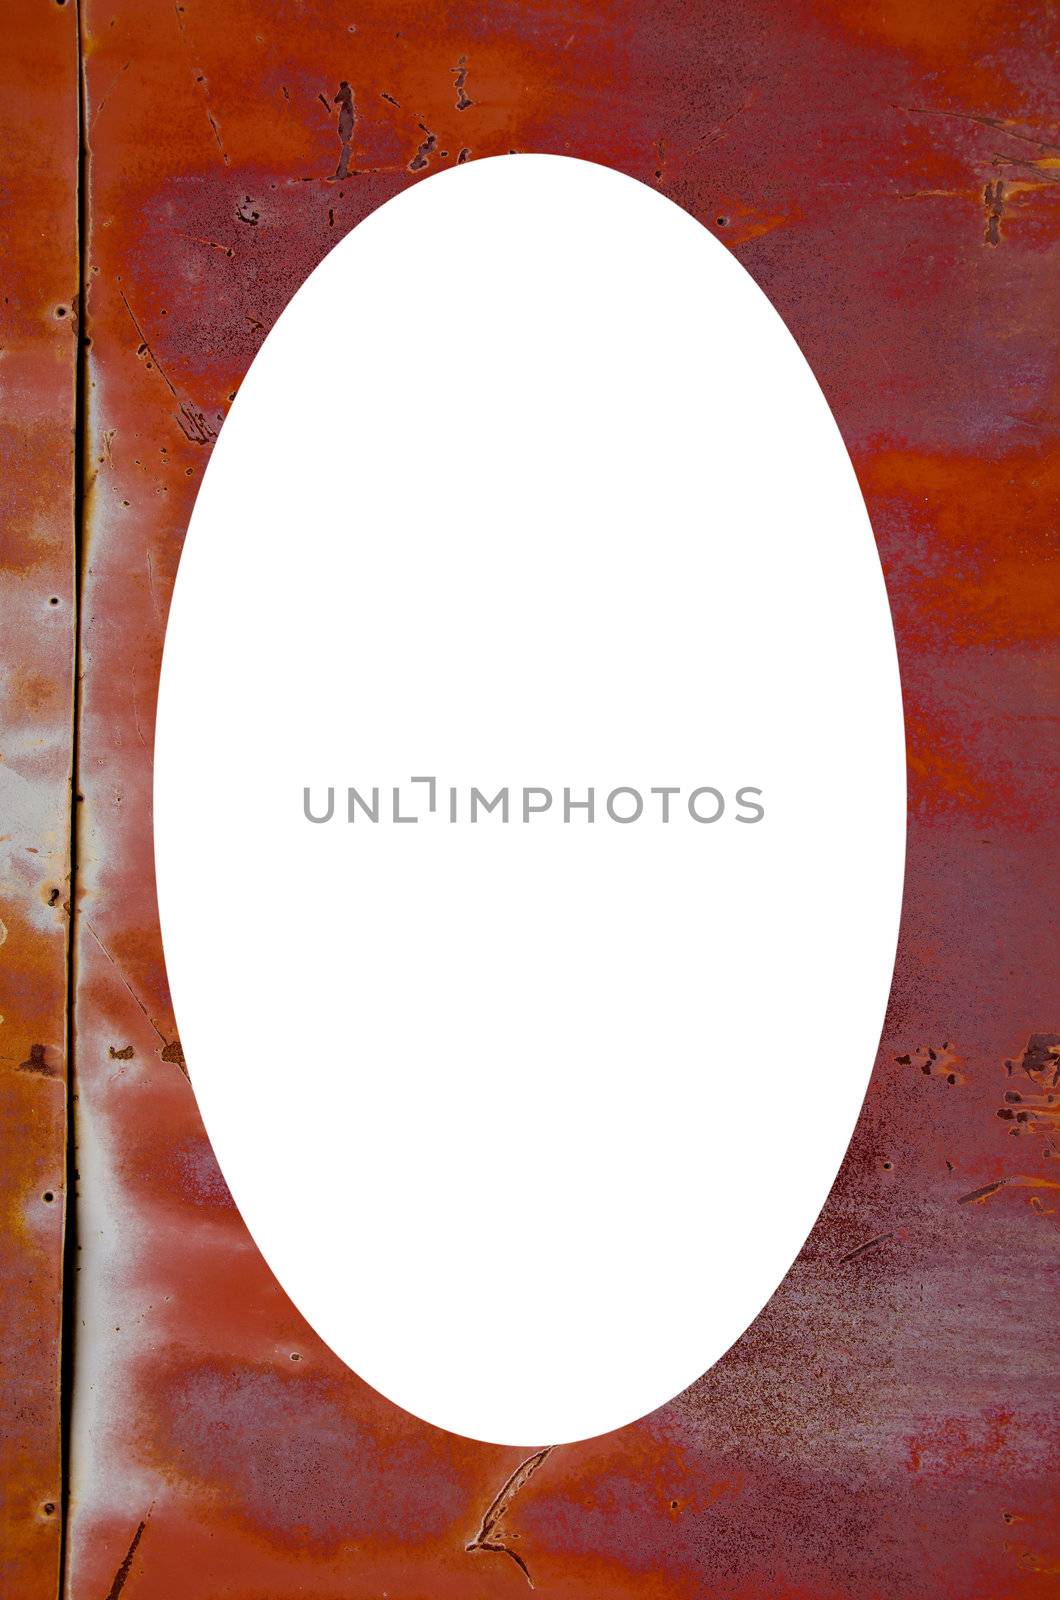 Isolated white oval place for text photograph image in center of frame. Rusty red painted wall made of tin. Neglected architectural bacground.